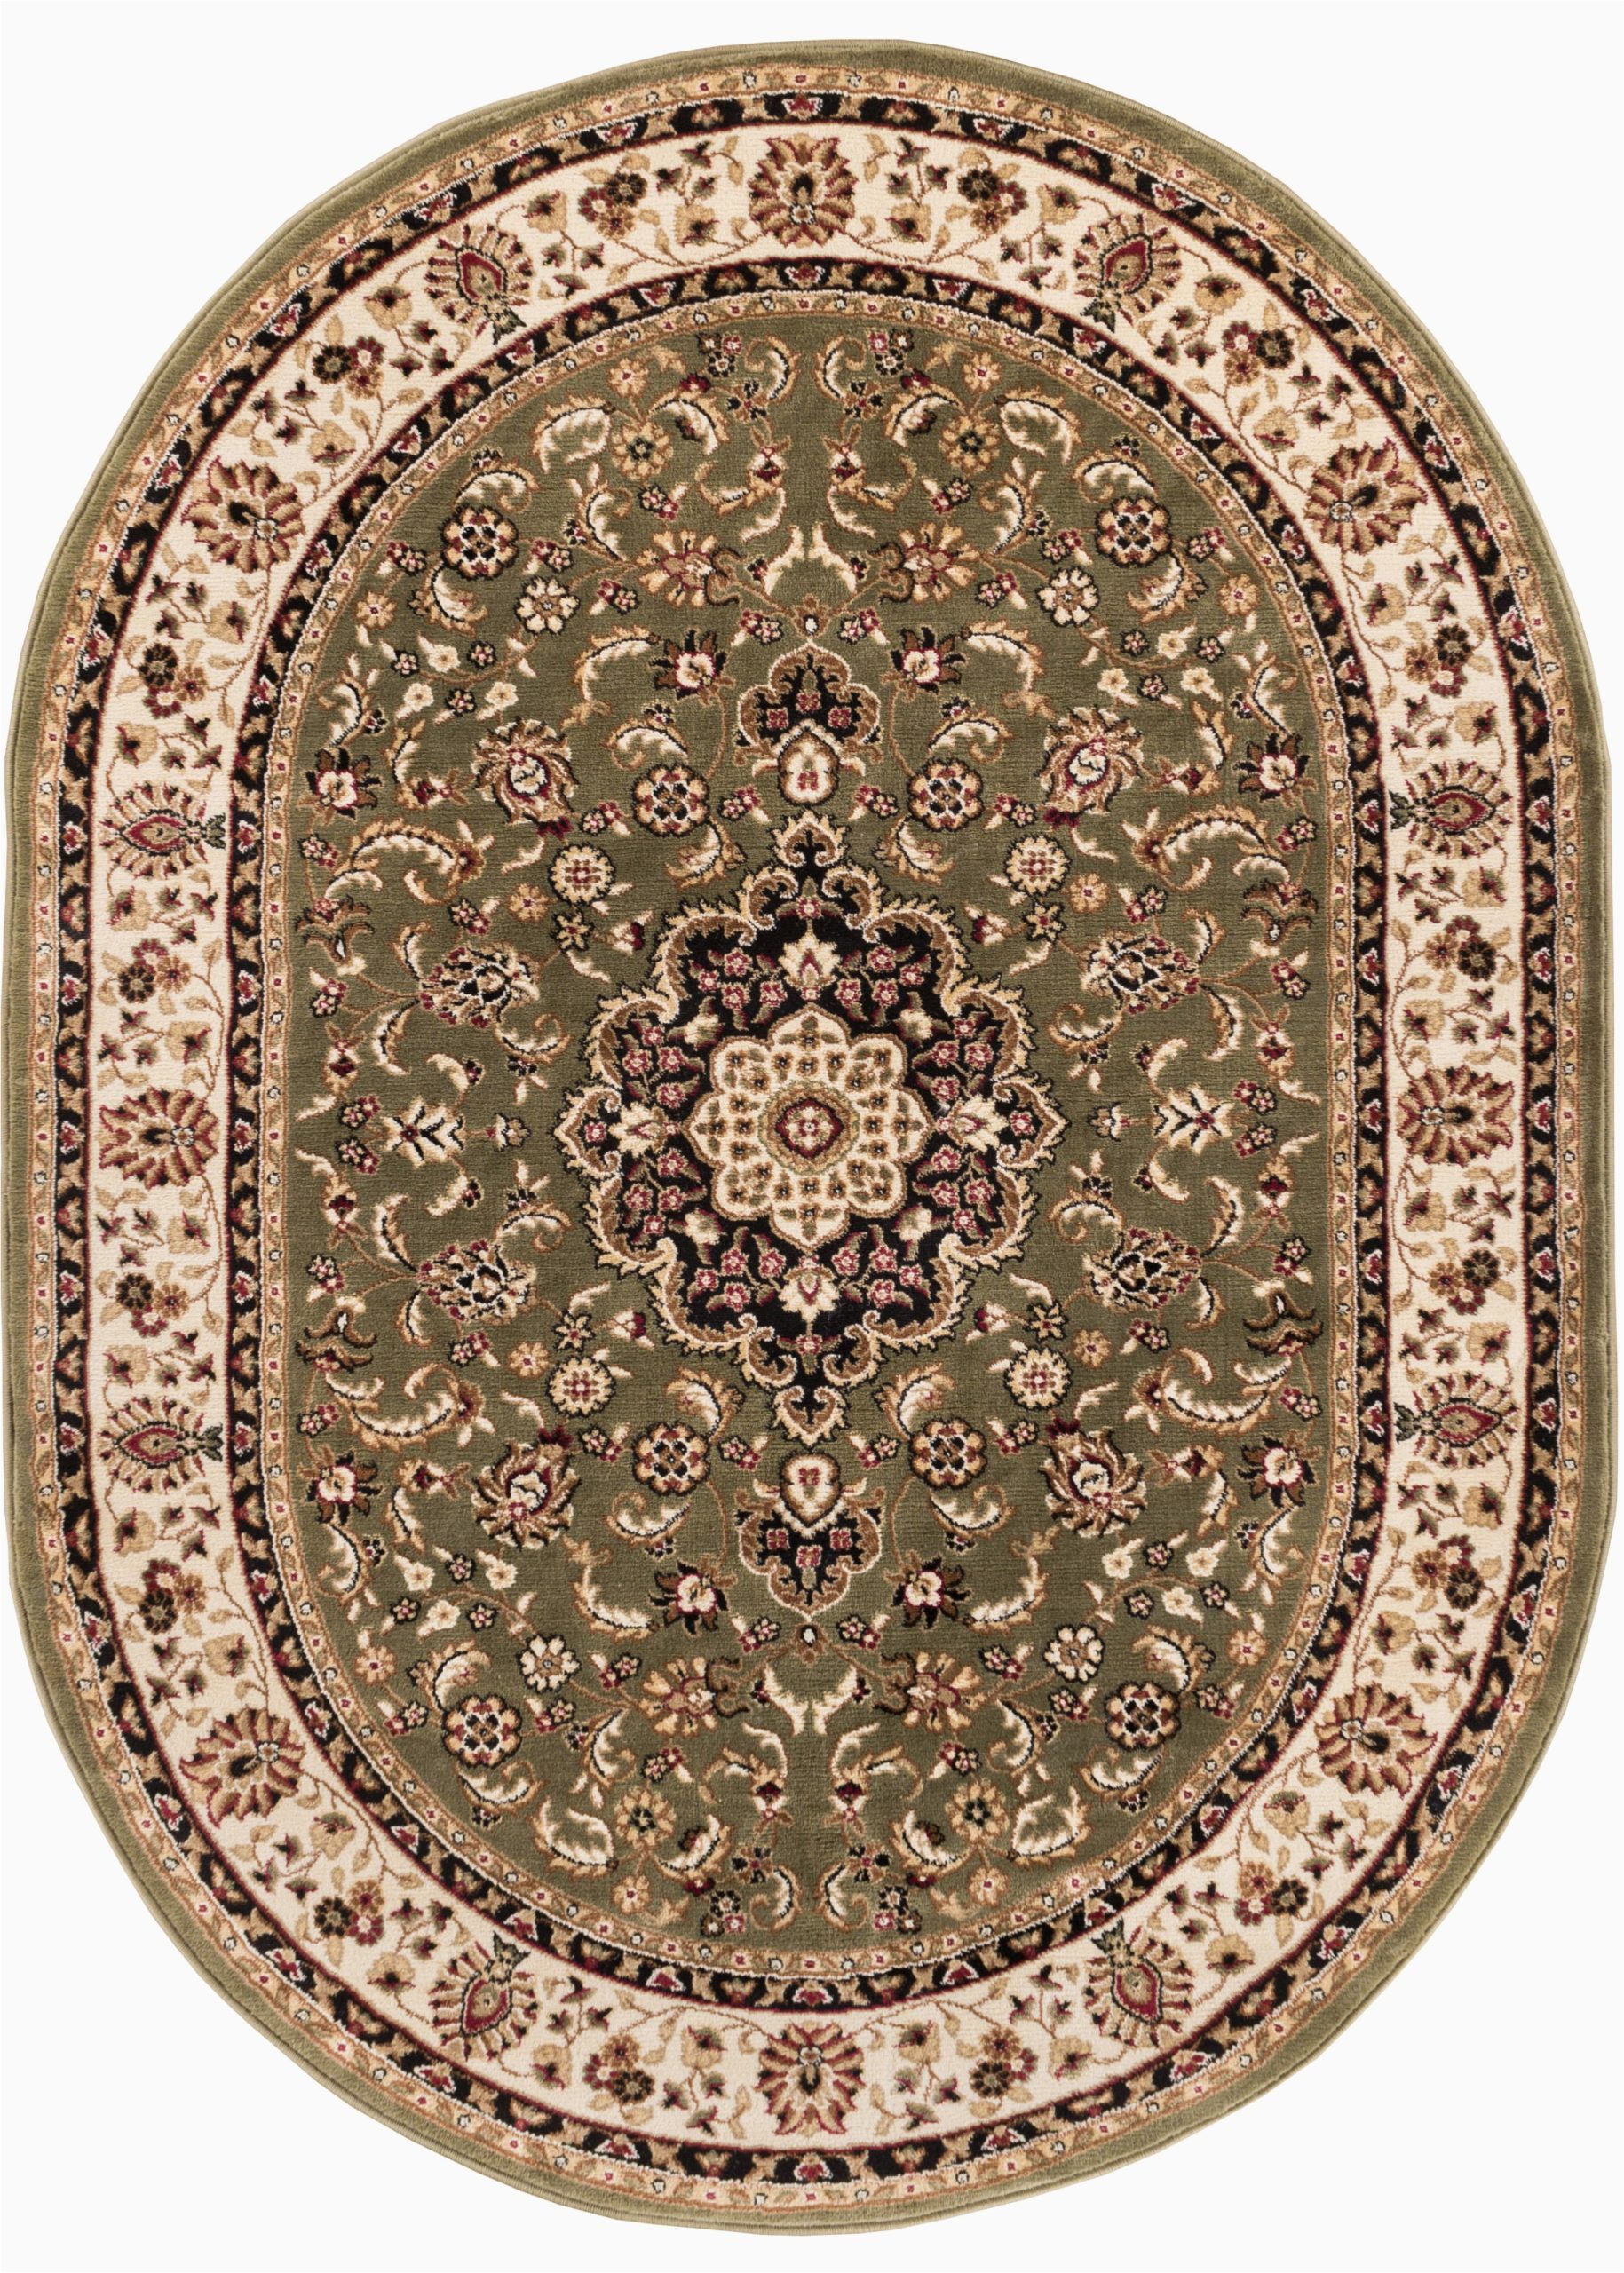 Home Depot Oval area Rugs Well Woven Barclay Medallion Kashan Traditional oriental Persian …